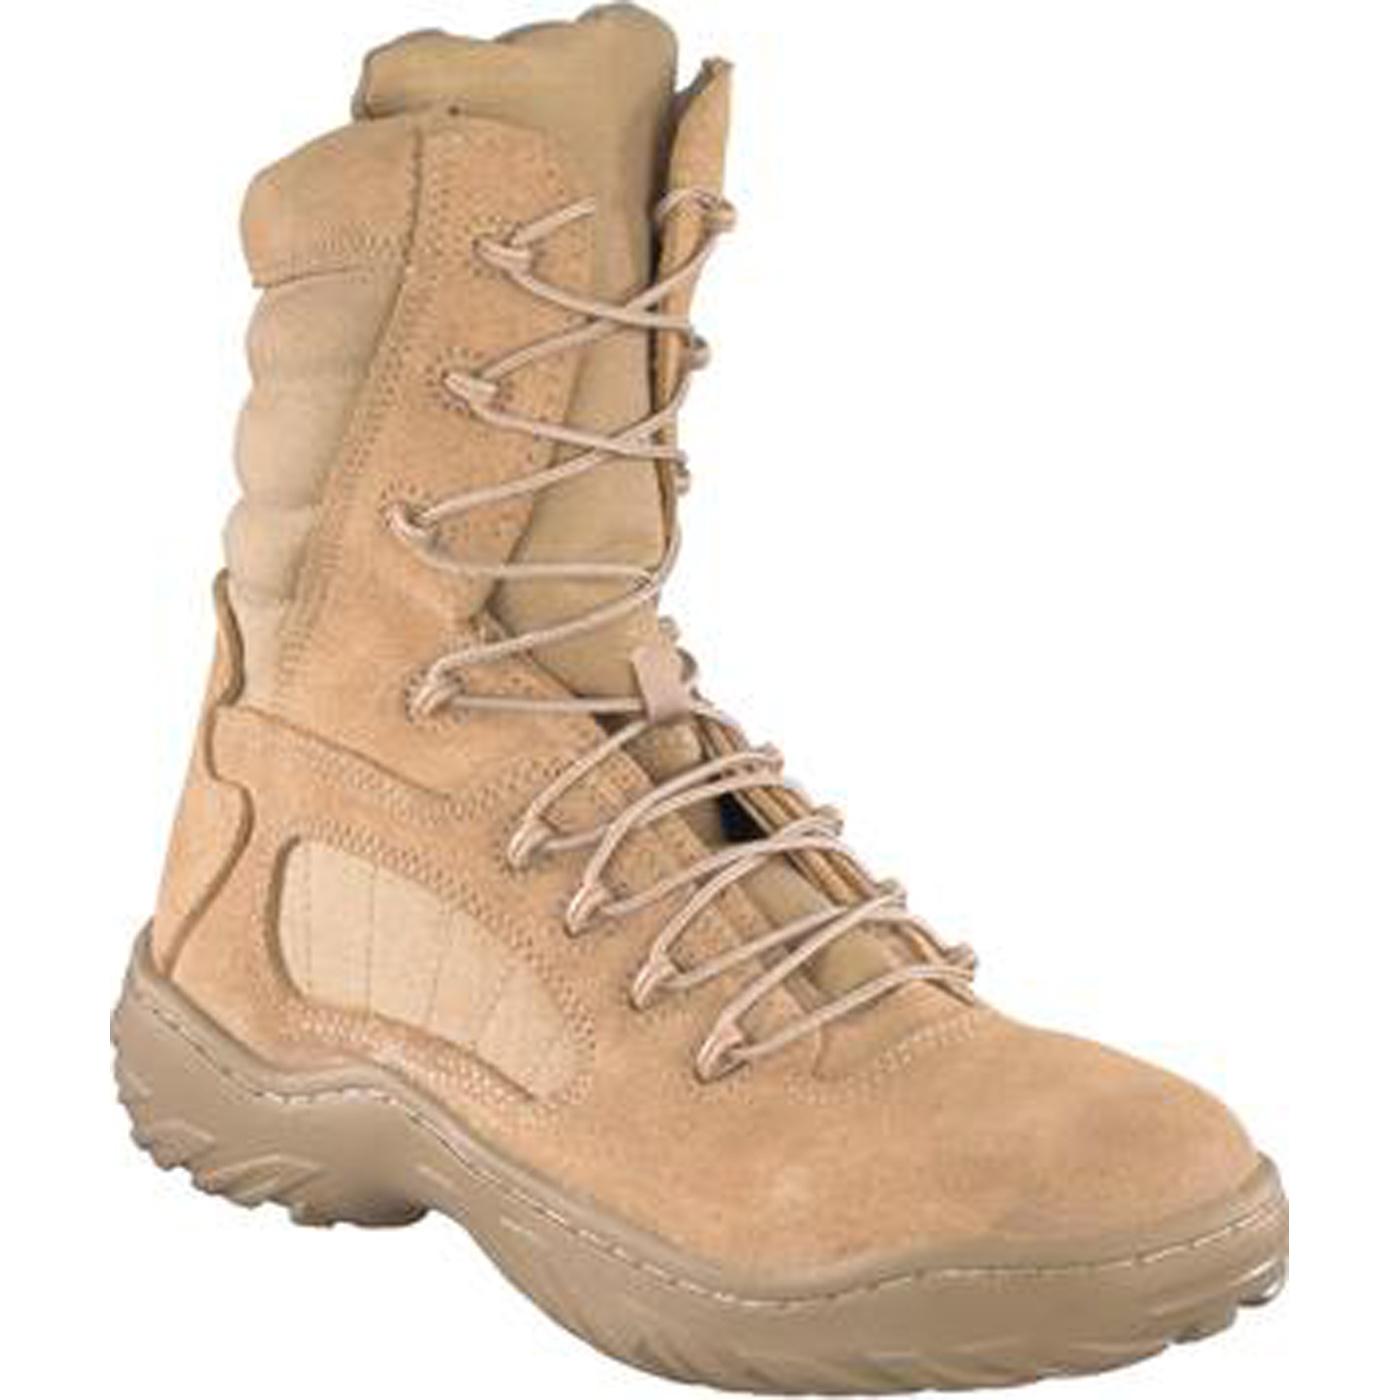 Reebok Military Boot Made in America Duty Boot - CM8994